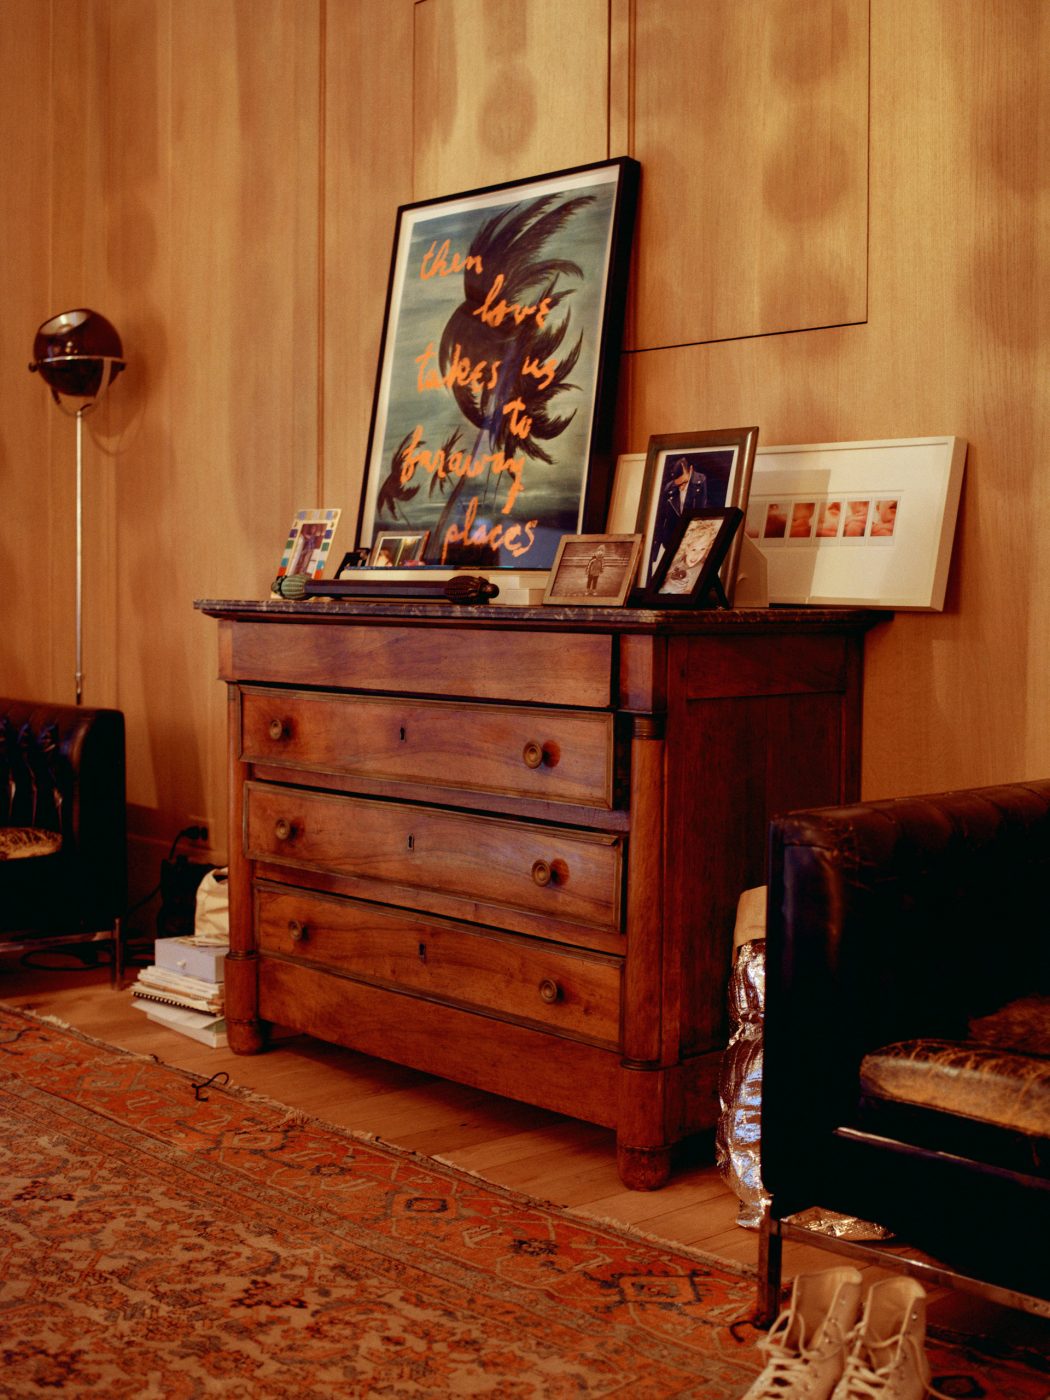 Chest of drawers in Lyons's home